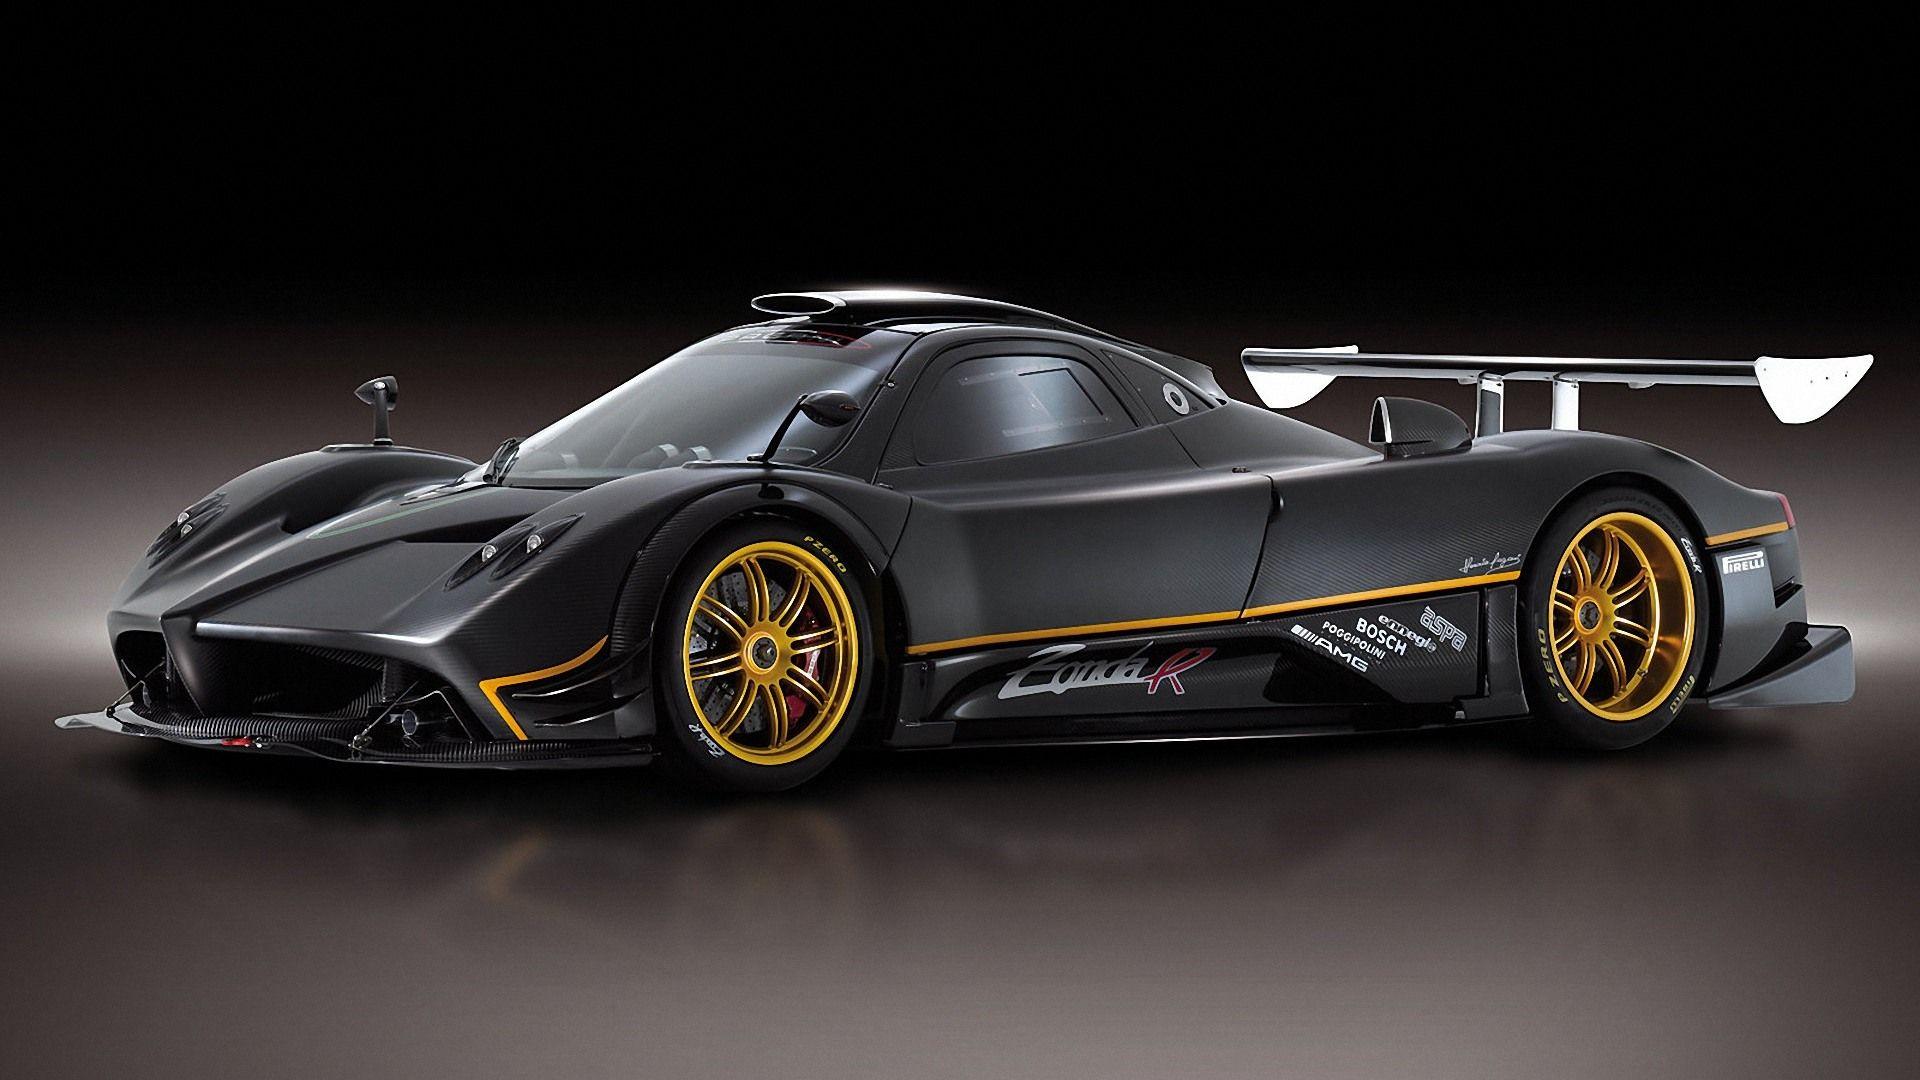 Feast your eyes on this $6.5m Pagani Zonda R Evolution